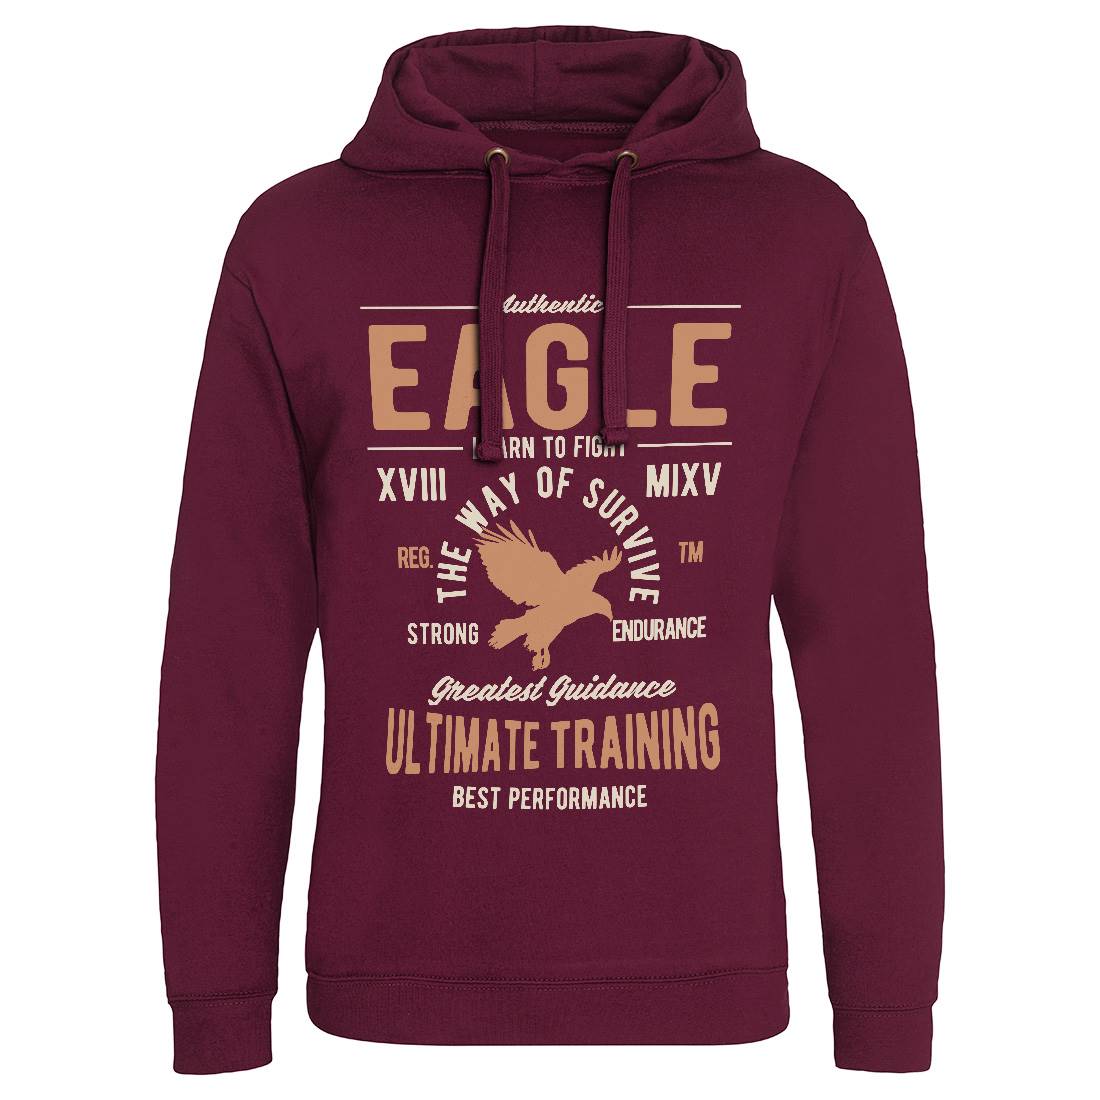 Authentic Eagle Mens Hoodie Without Pocket Animals B180